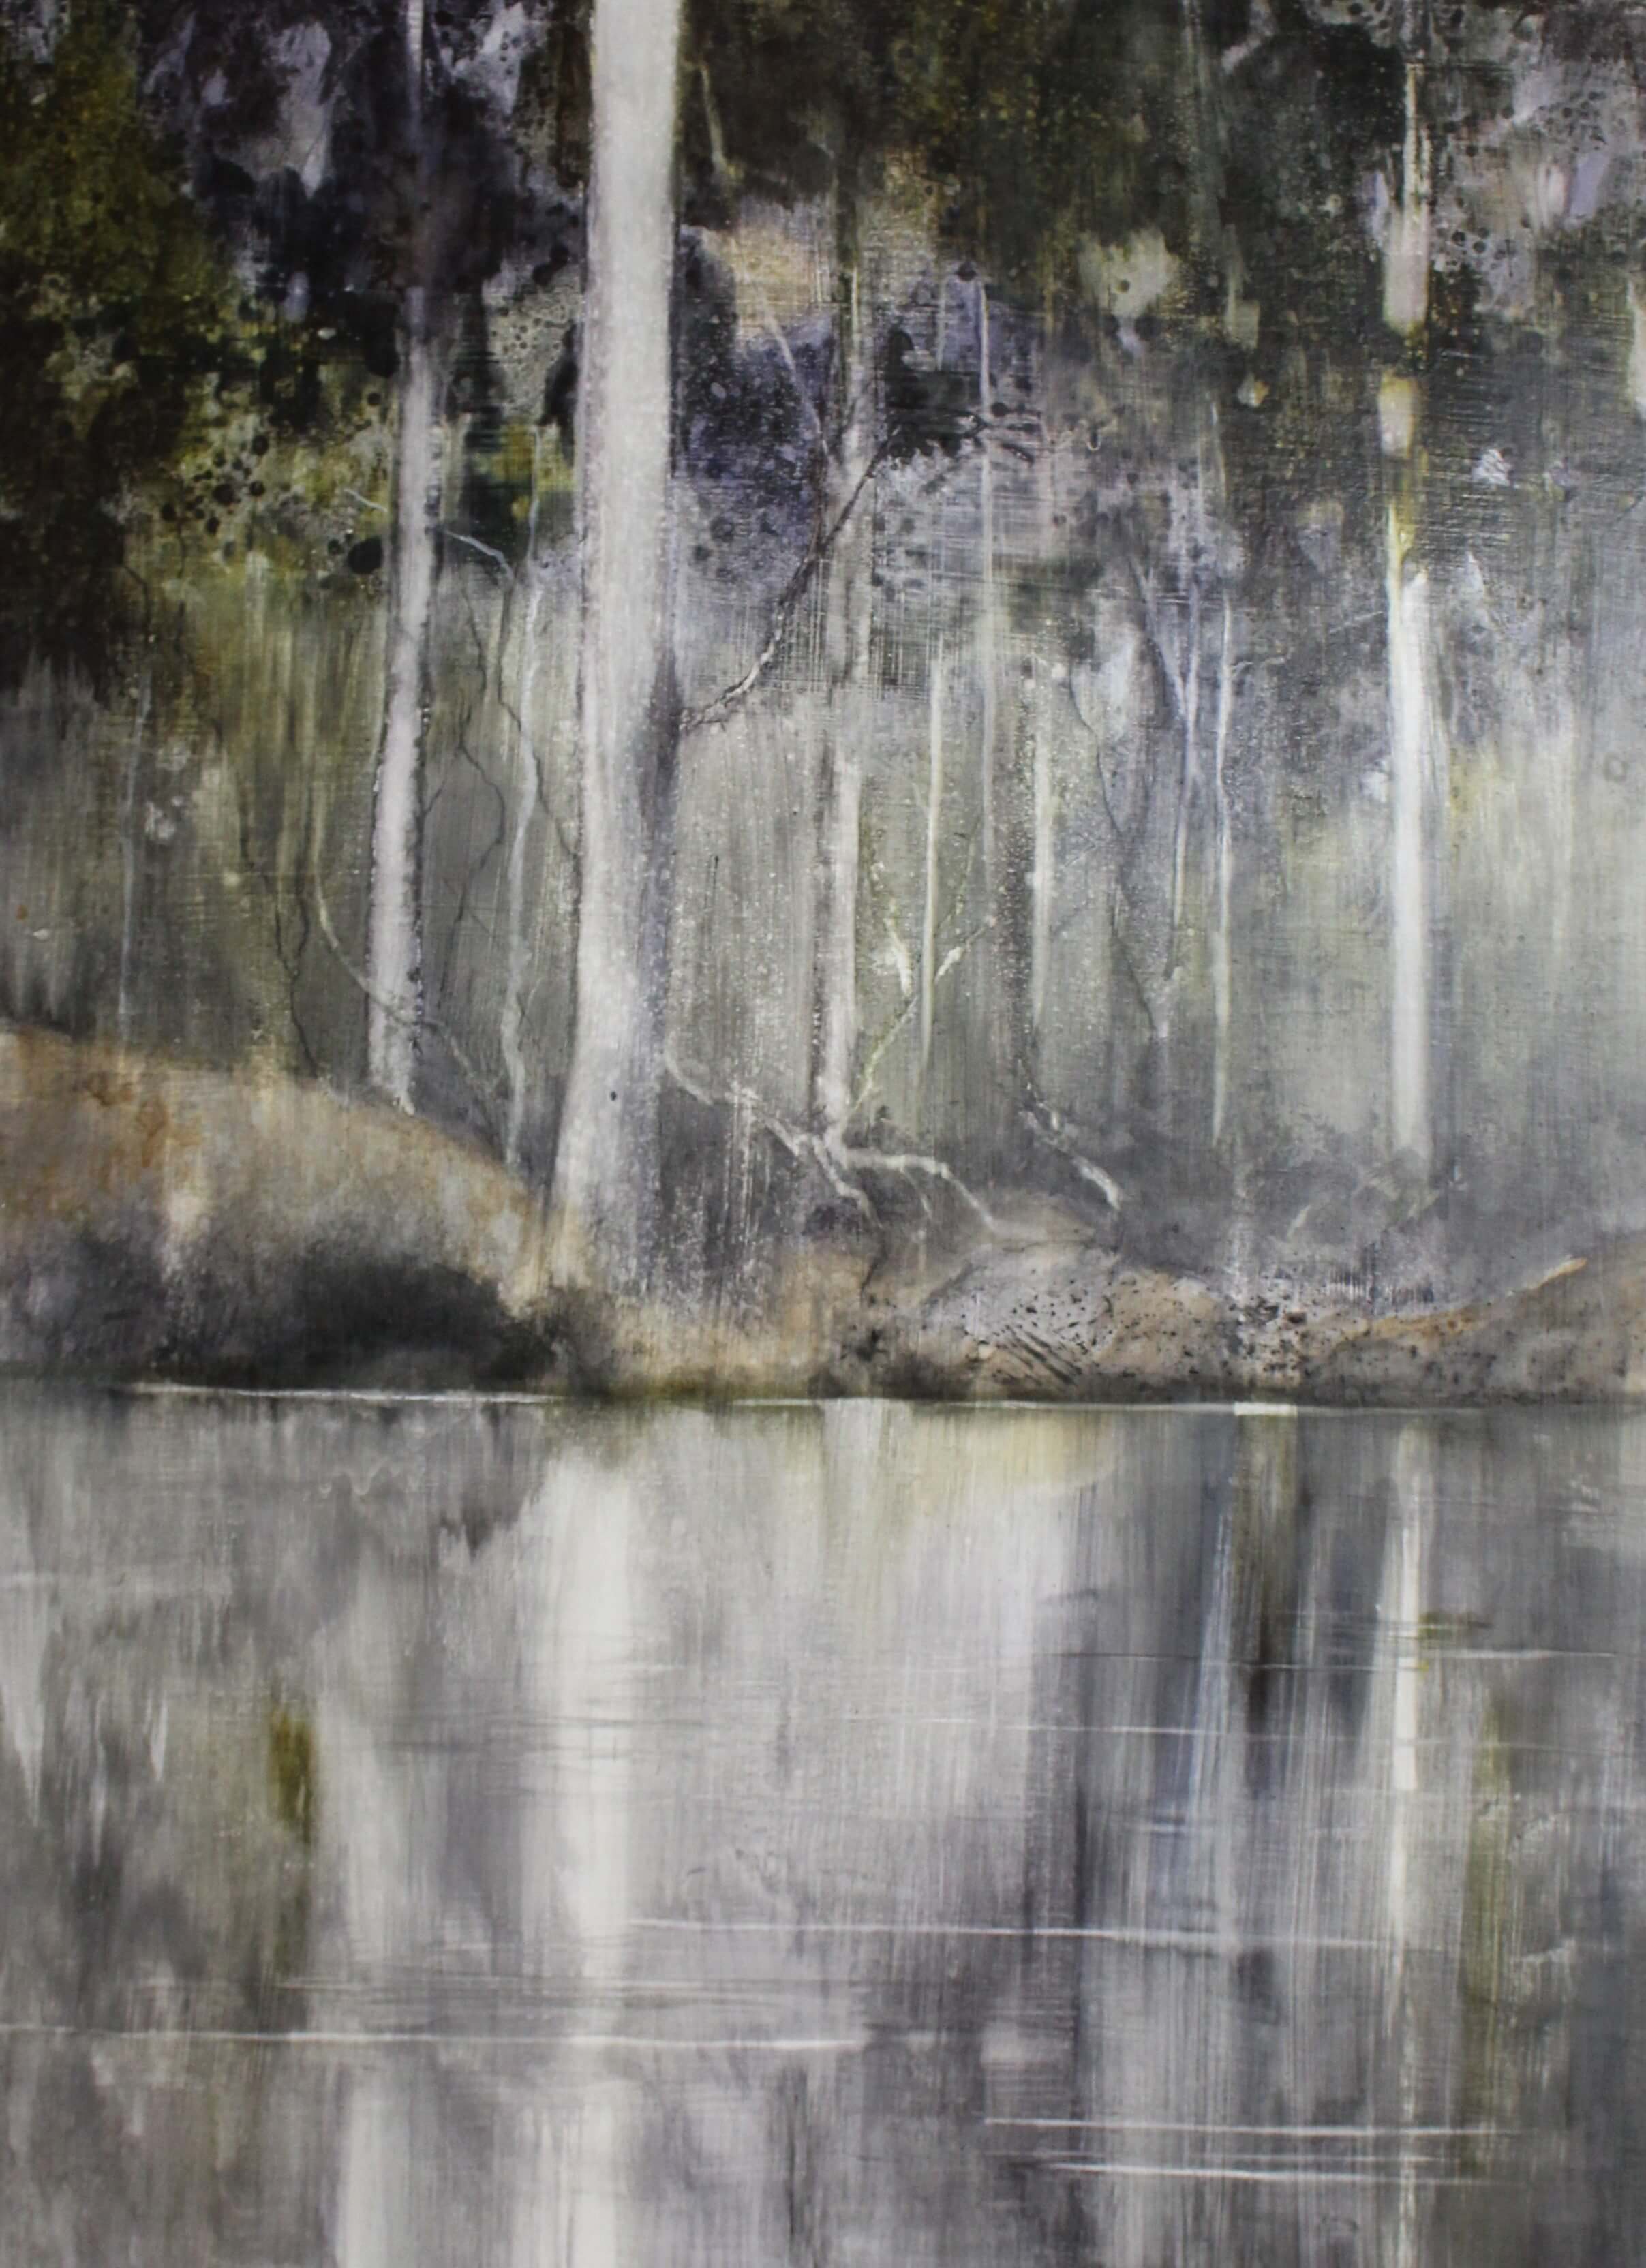 Trees with river in foreground, watercolour grey tones.